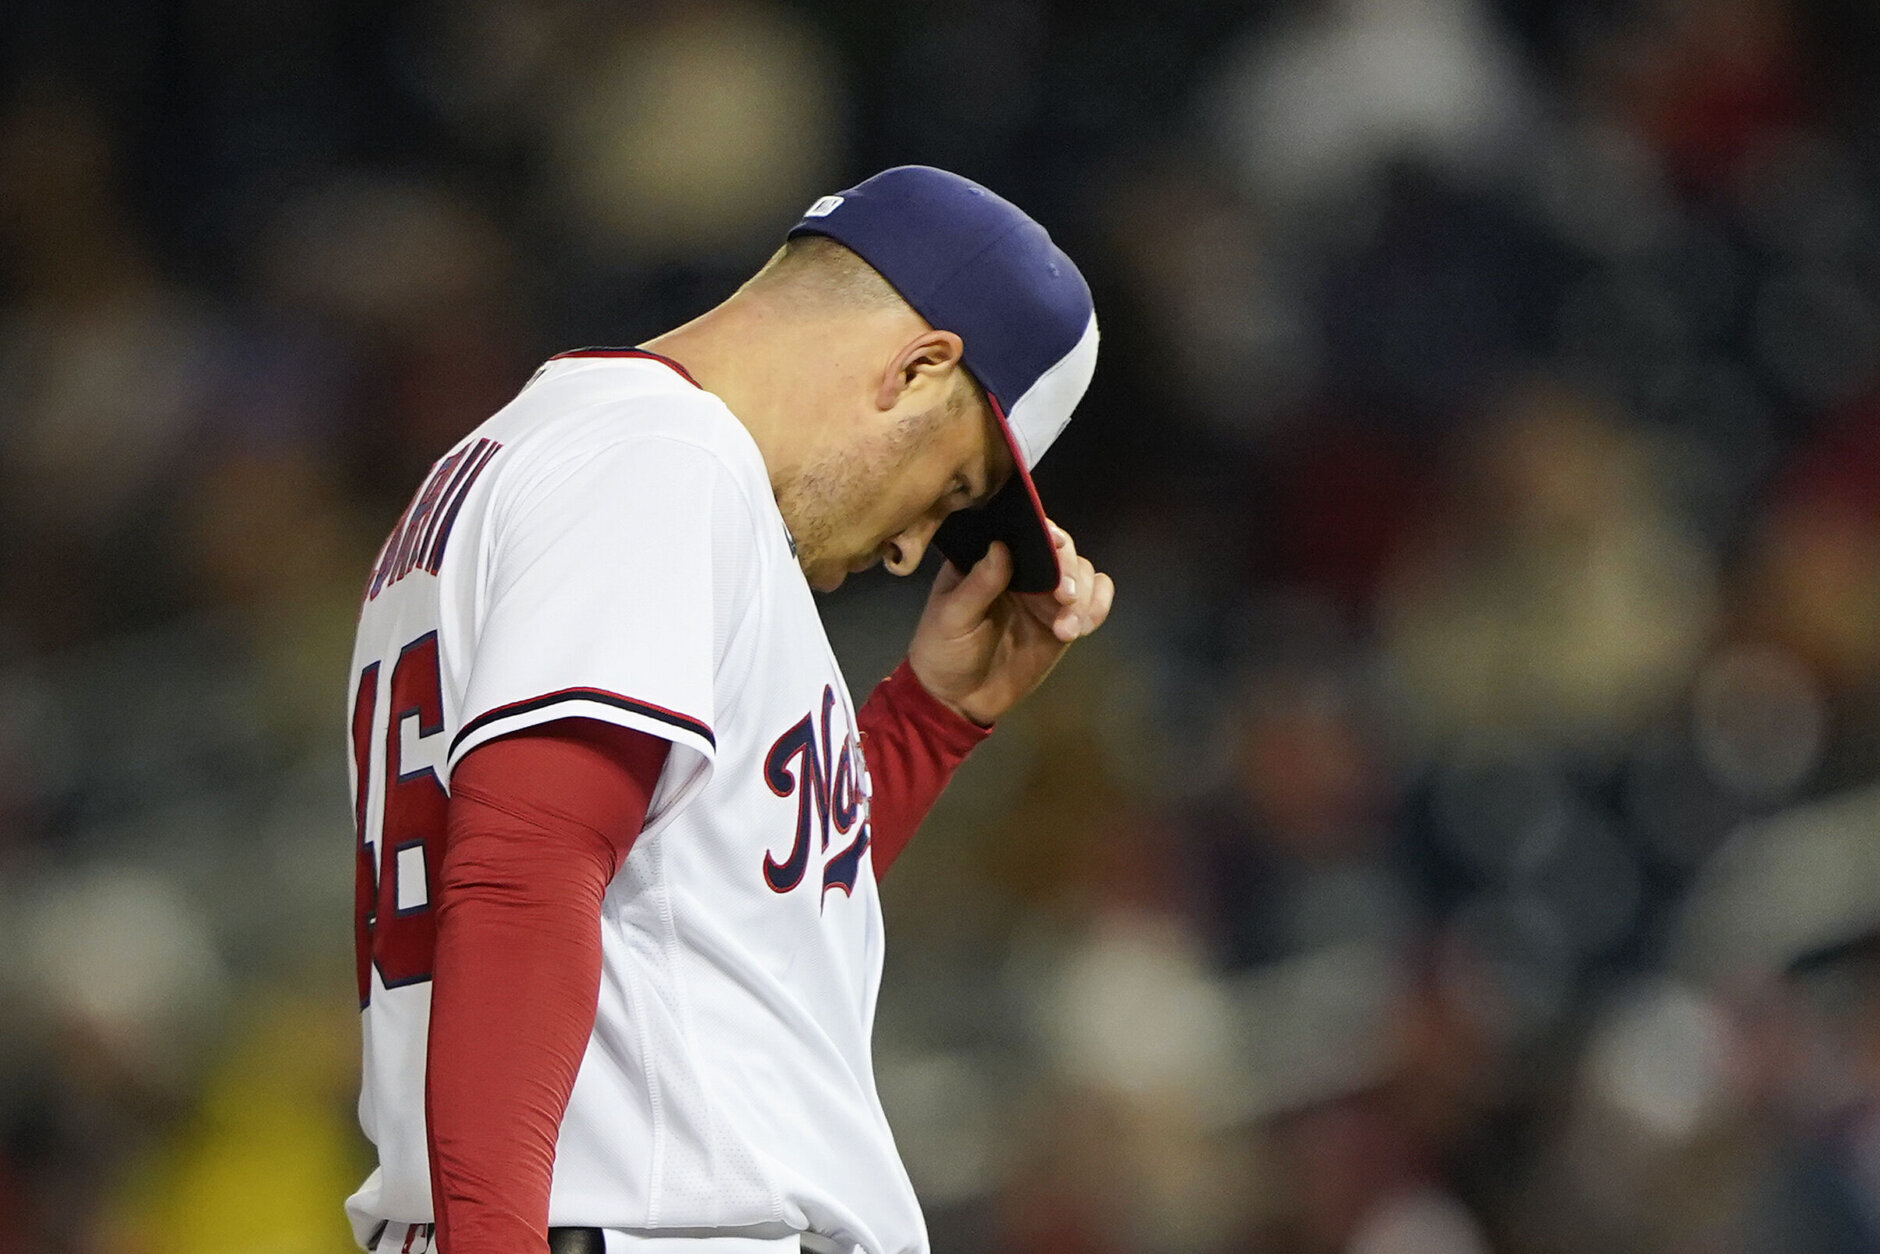 Washington Nationals starting pitcher Patrick Corbin exits the game during the fifth inning of an opening day baseball game against the New York Mets at Nationals Park, Thursday, April 7, 2022, in Washington. (AP Photo/Alex Brandon)